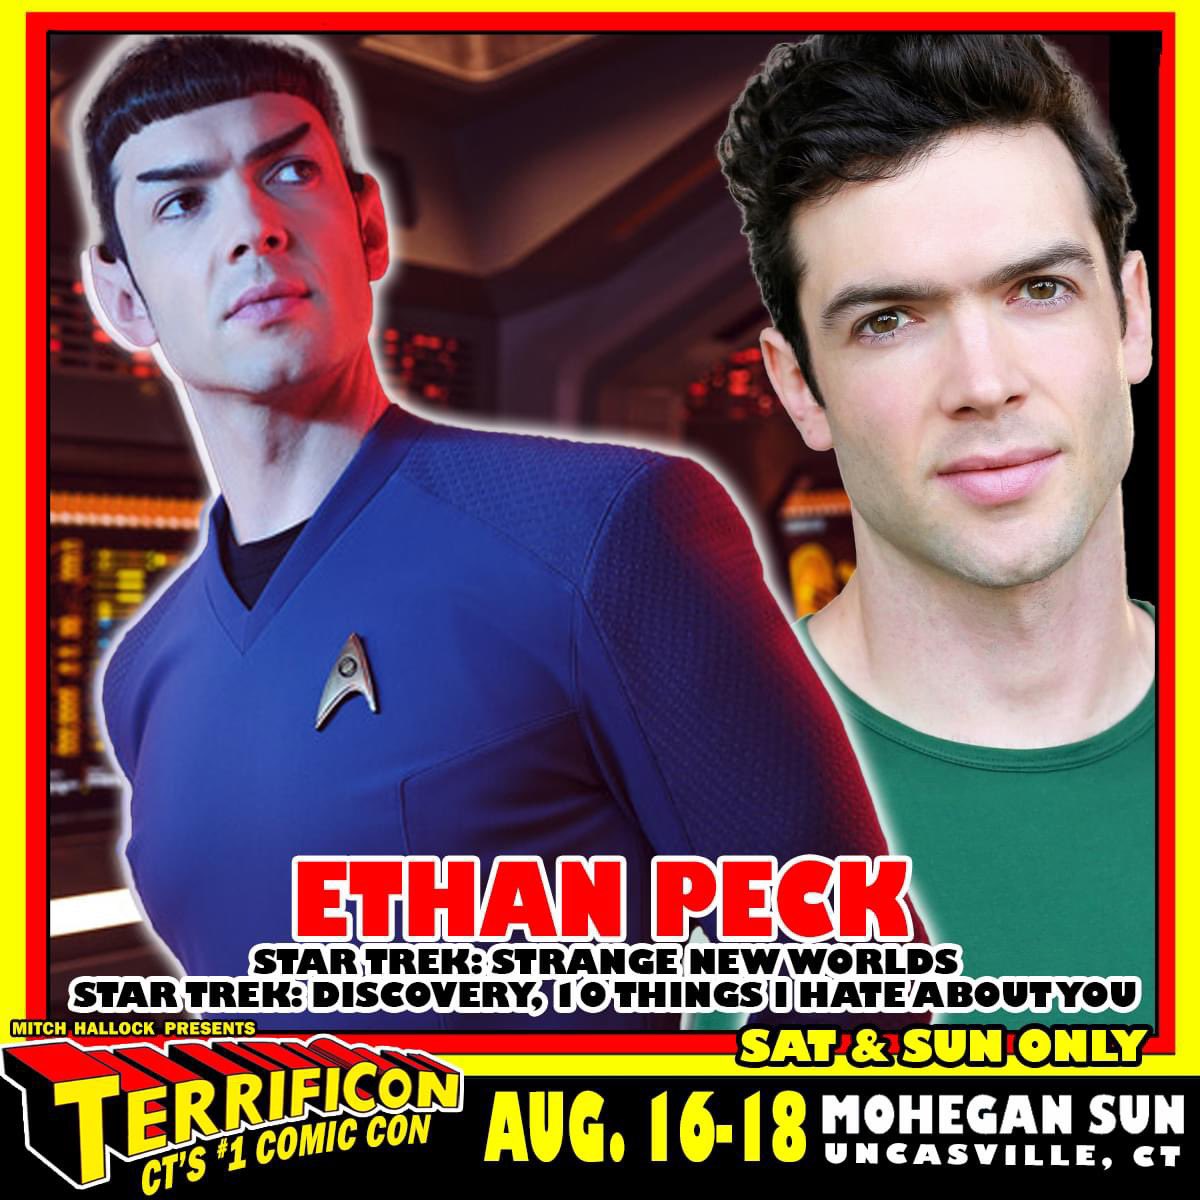 TERRIFICON is beaming one more Star Trek actor into Mohegan Sun this August! Please welcome the Ethan Peck, who plays the iconic Vulcan Mr. Spock on Star Trek Strange New Worlds! Ethan is the grandson of actor Gregory Peck and his first wife Greta Kukkonen. In 2019, he played a…